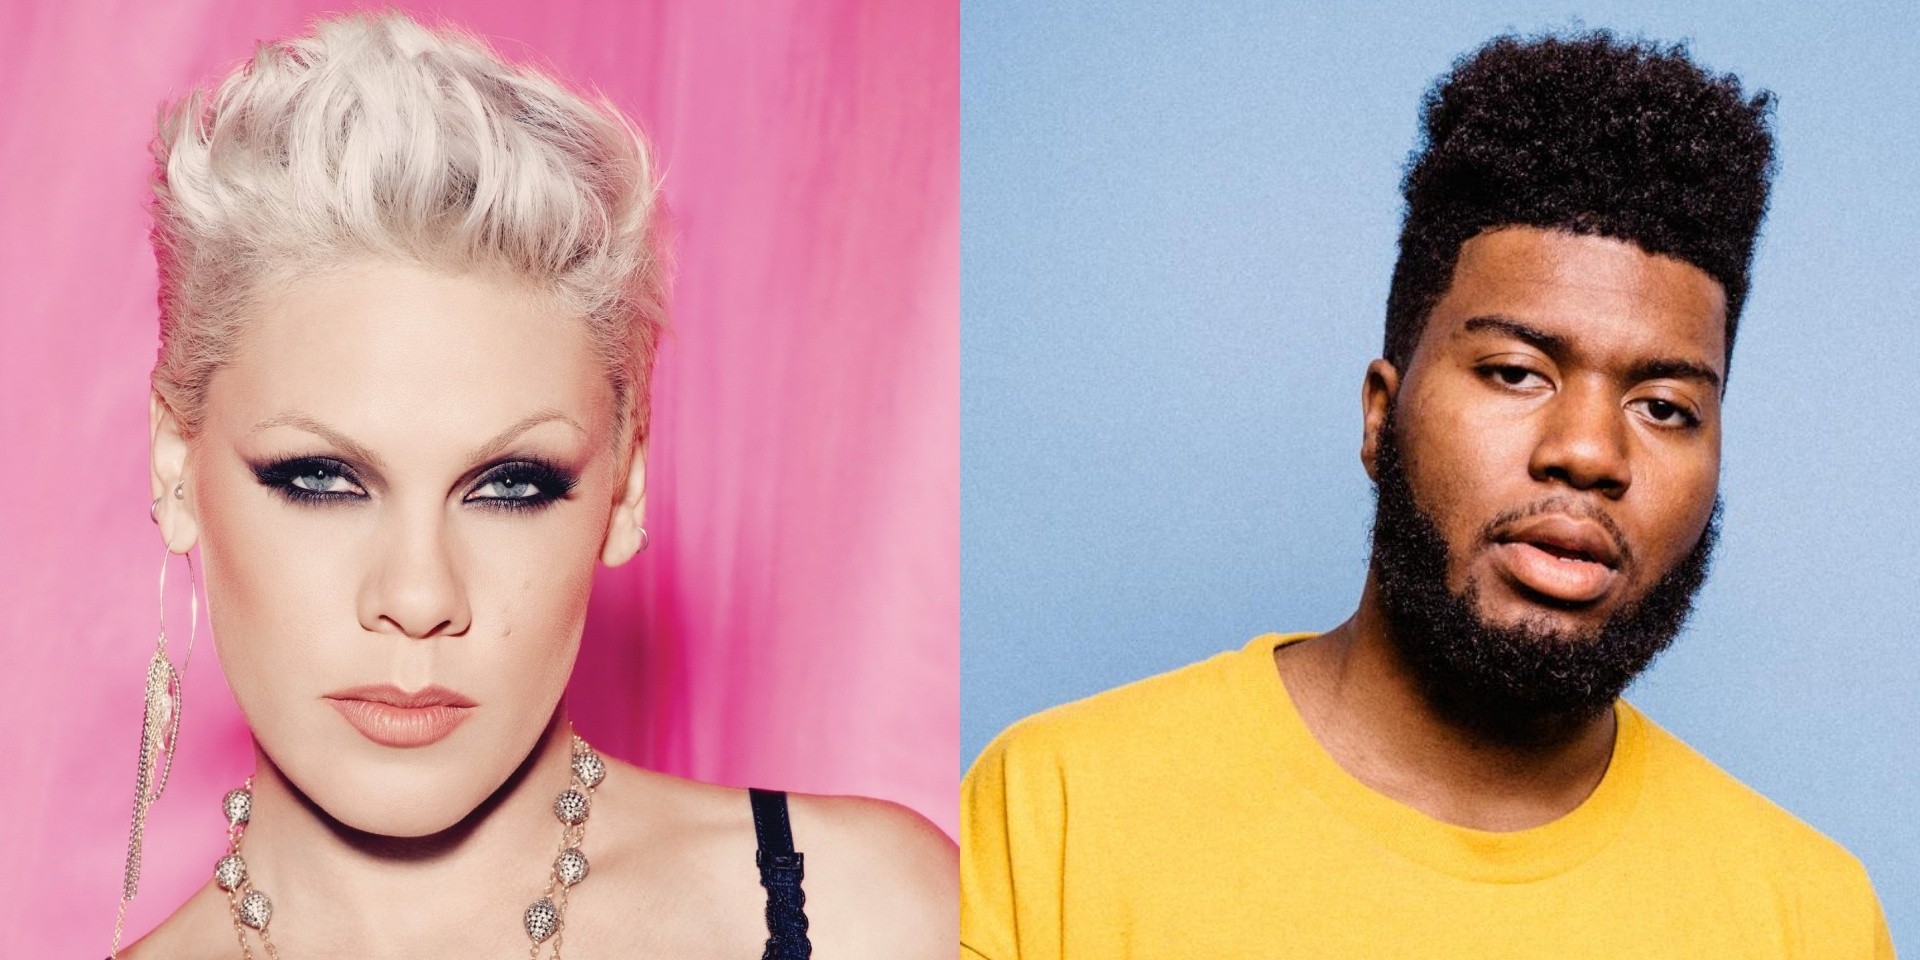 P!nk releases new single 'Hurts 2B Human' with Khalid – listen